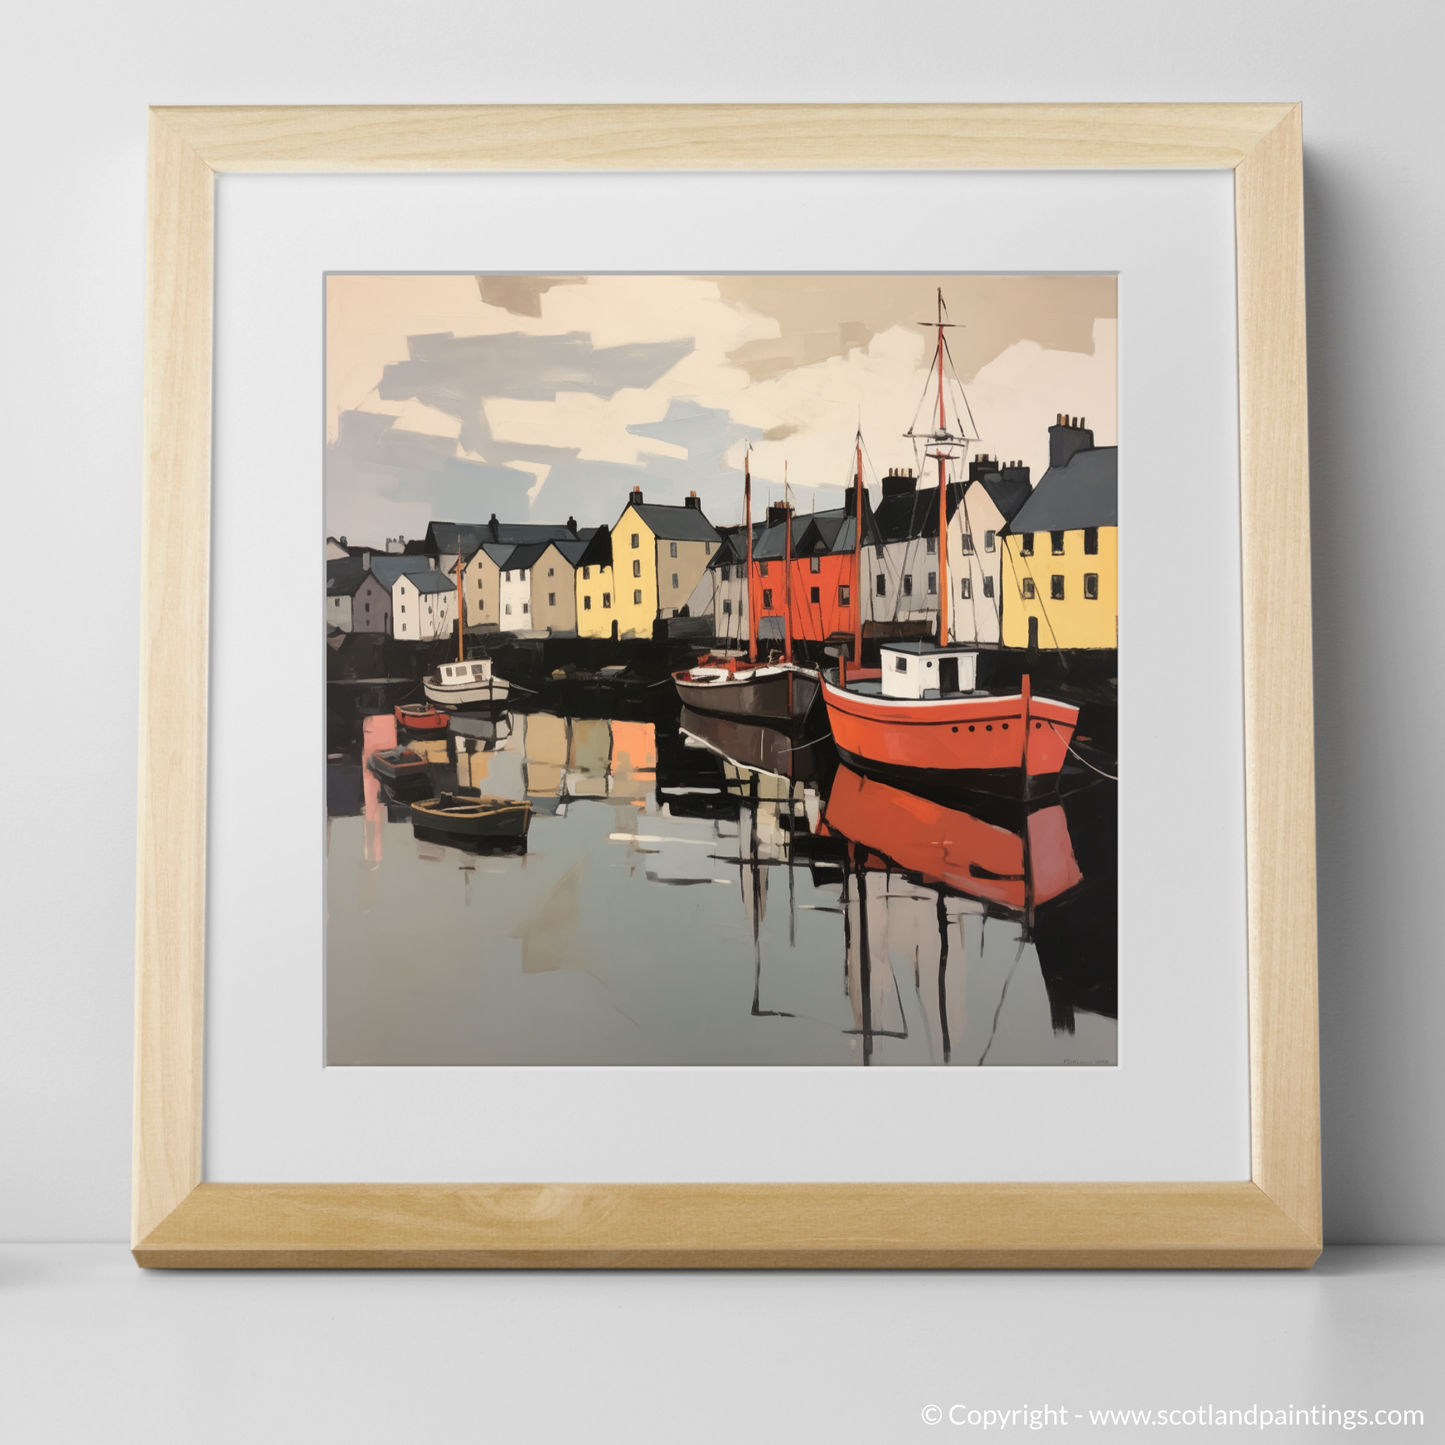 Art Print of Stornoway Harbour with a natural frame